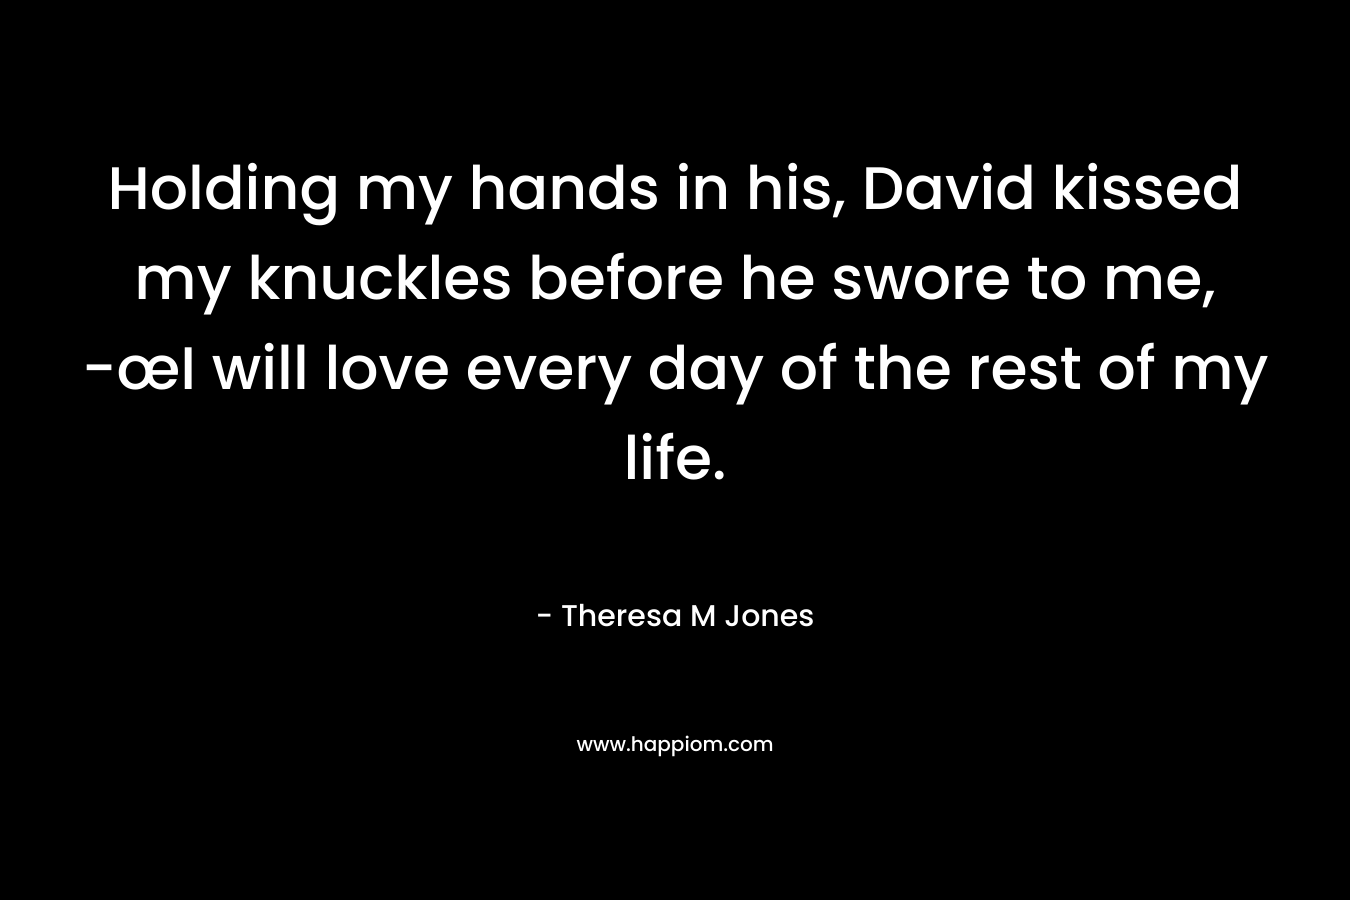 Holding my hands in his, David kissed my knuckles before he swore to me, -œI will love every day of the rest of my life. – Theresa M Jones